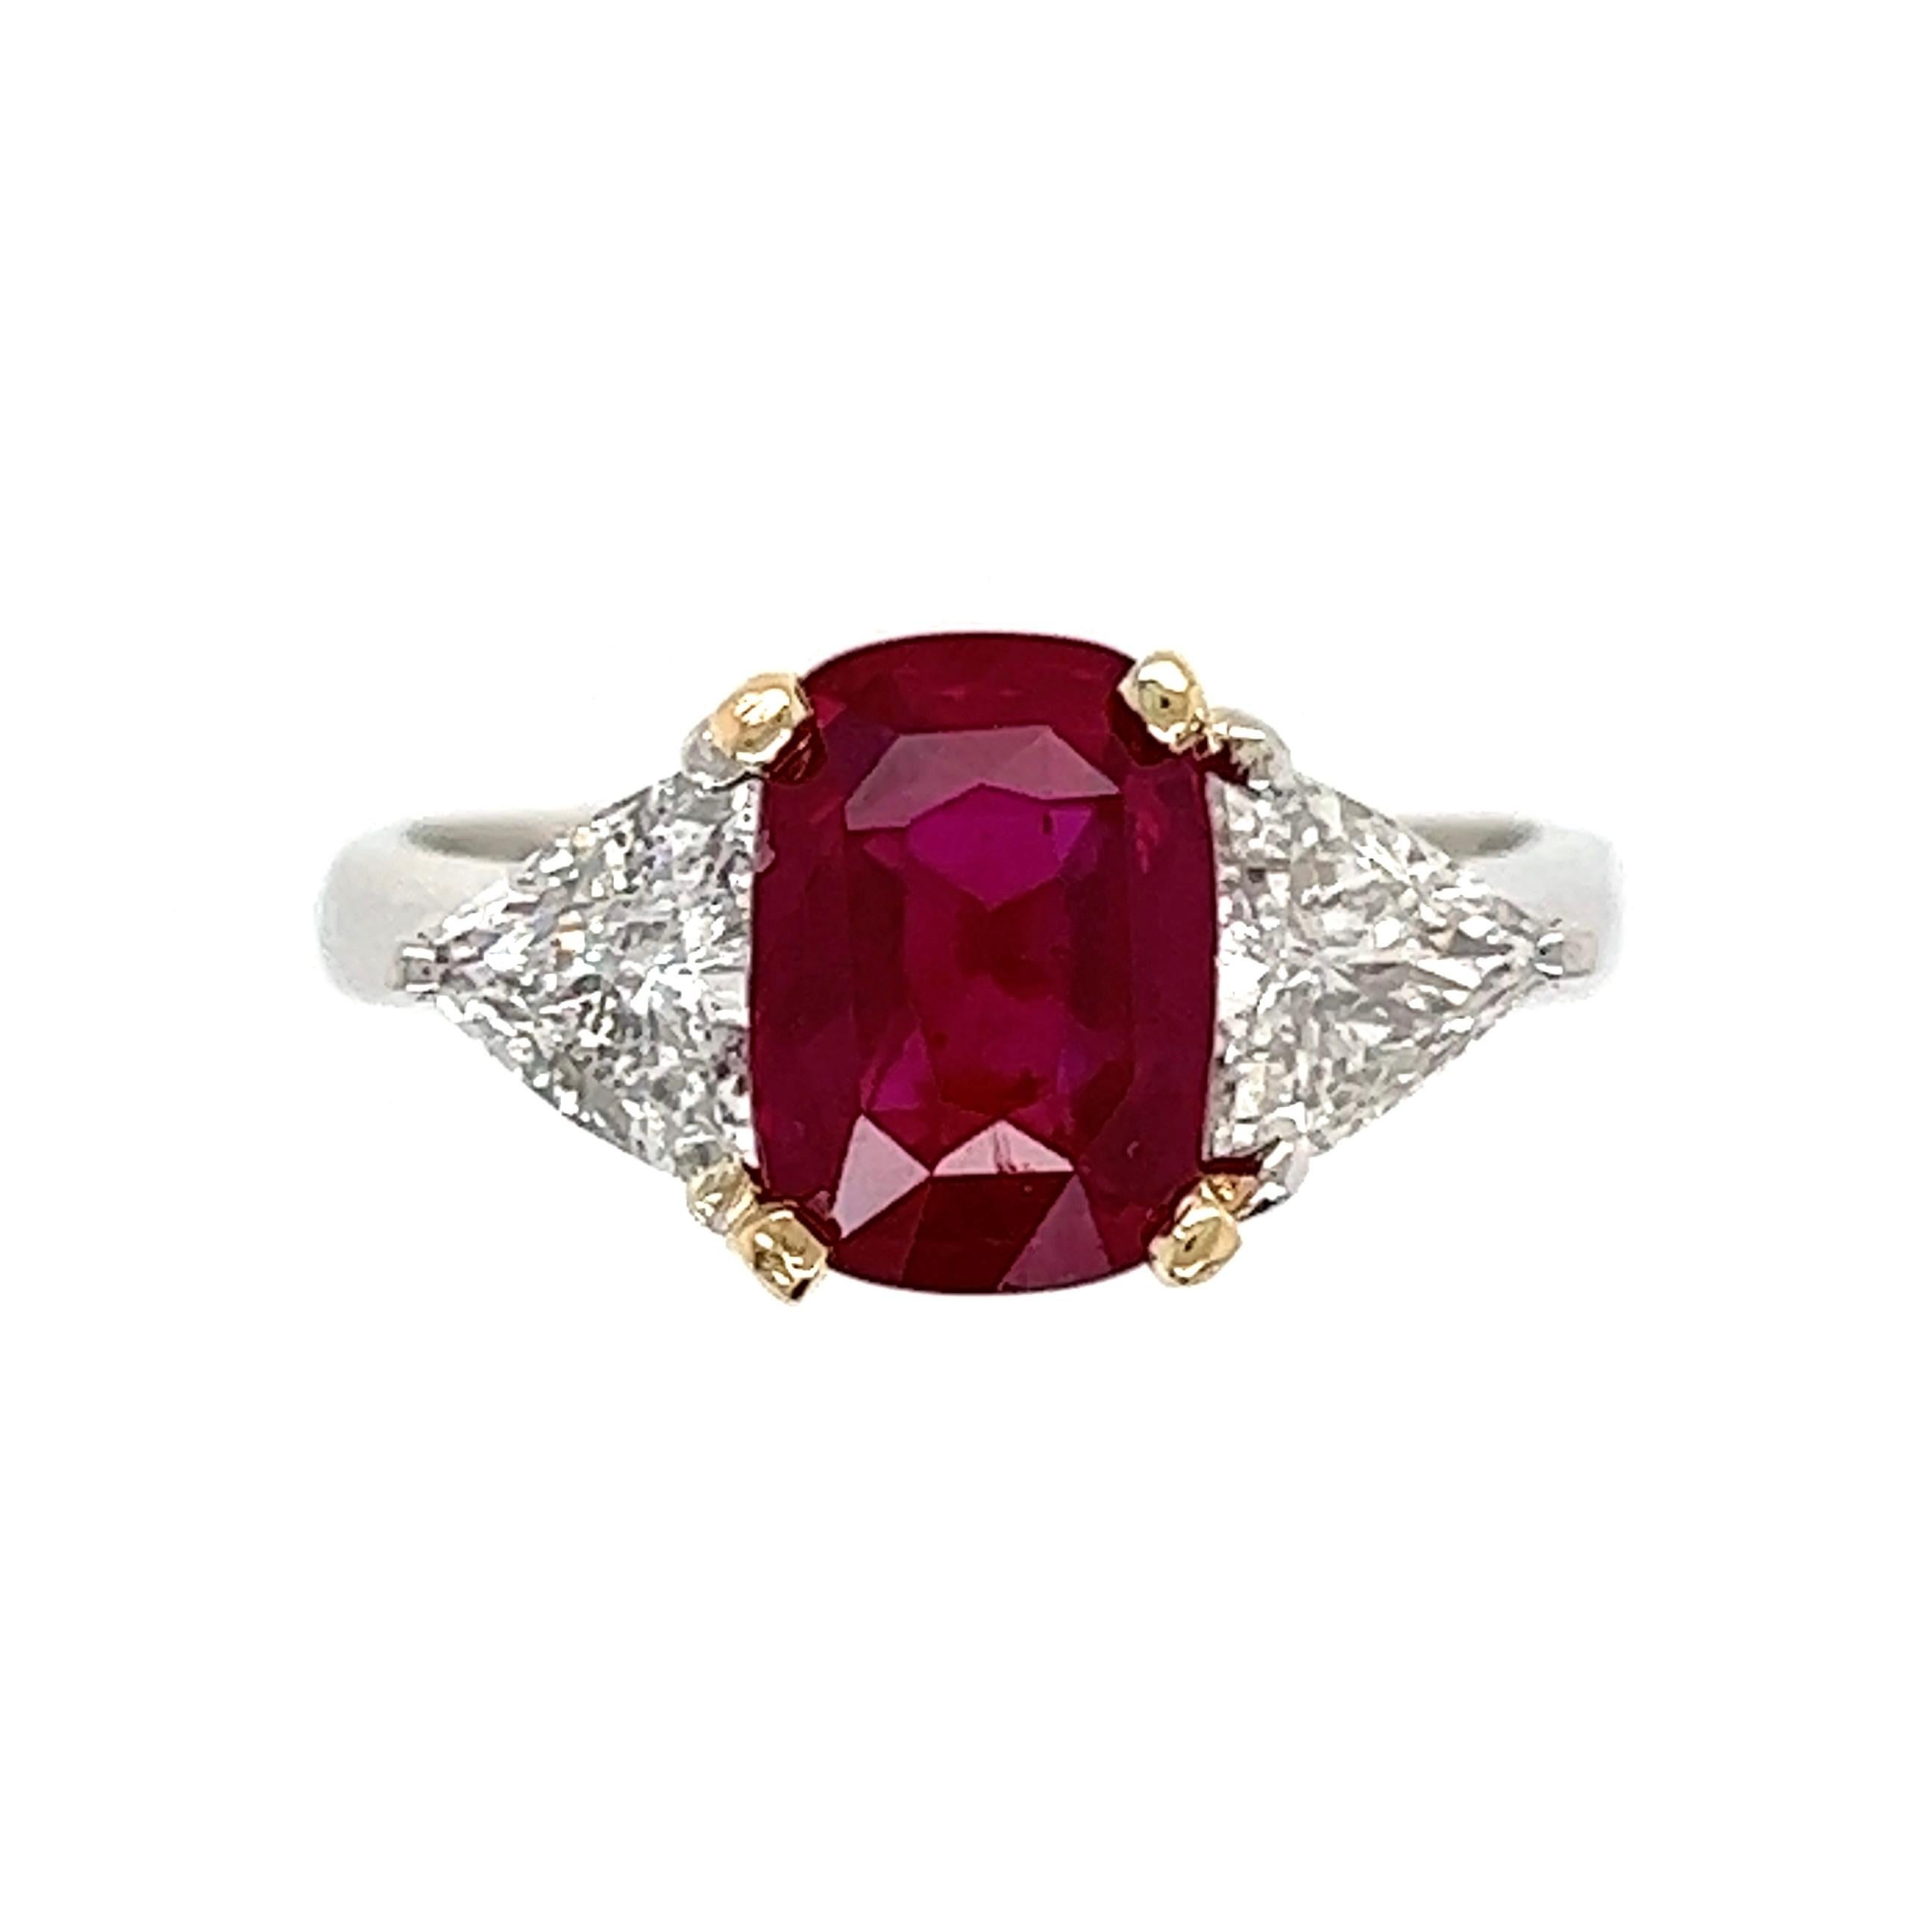 2.80 Carat Ruby GIA and Trillion Diamond 3-Stone Gold Ring Estate Fine Jewelry For Sale 1